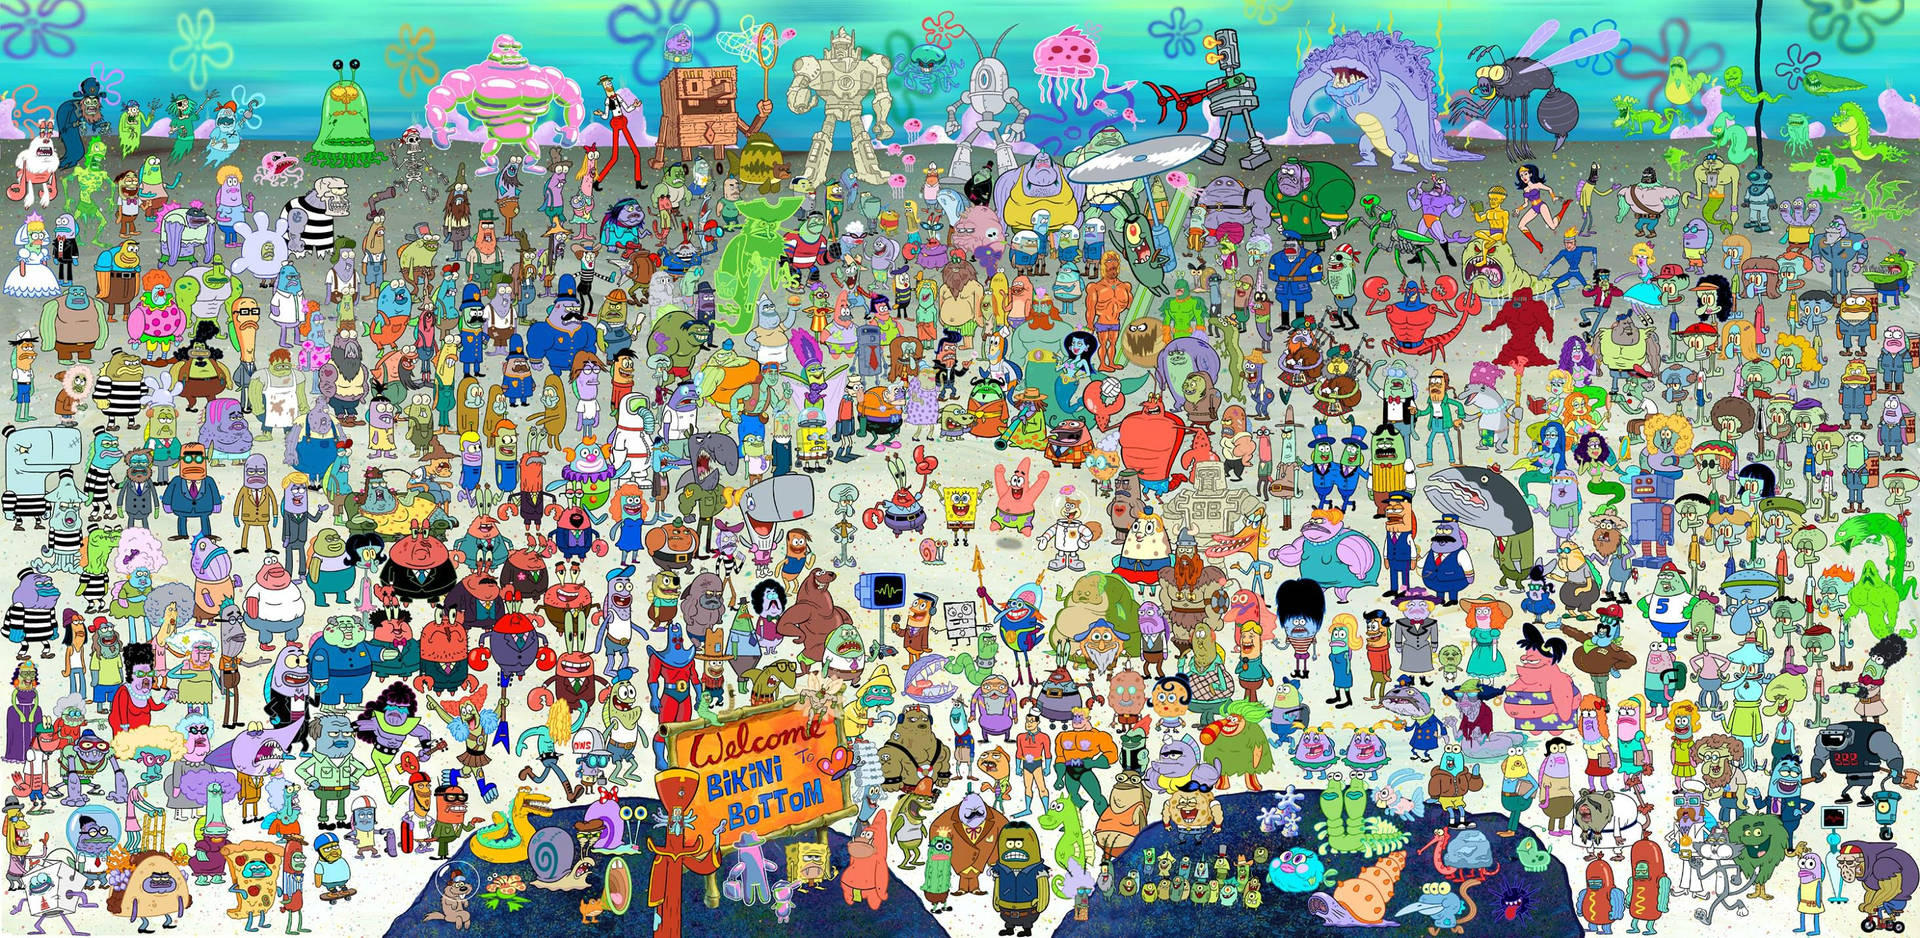 Fun Times With Spongebob And Friends. Background